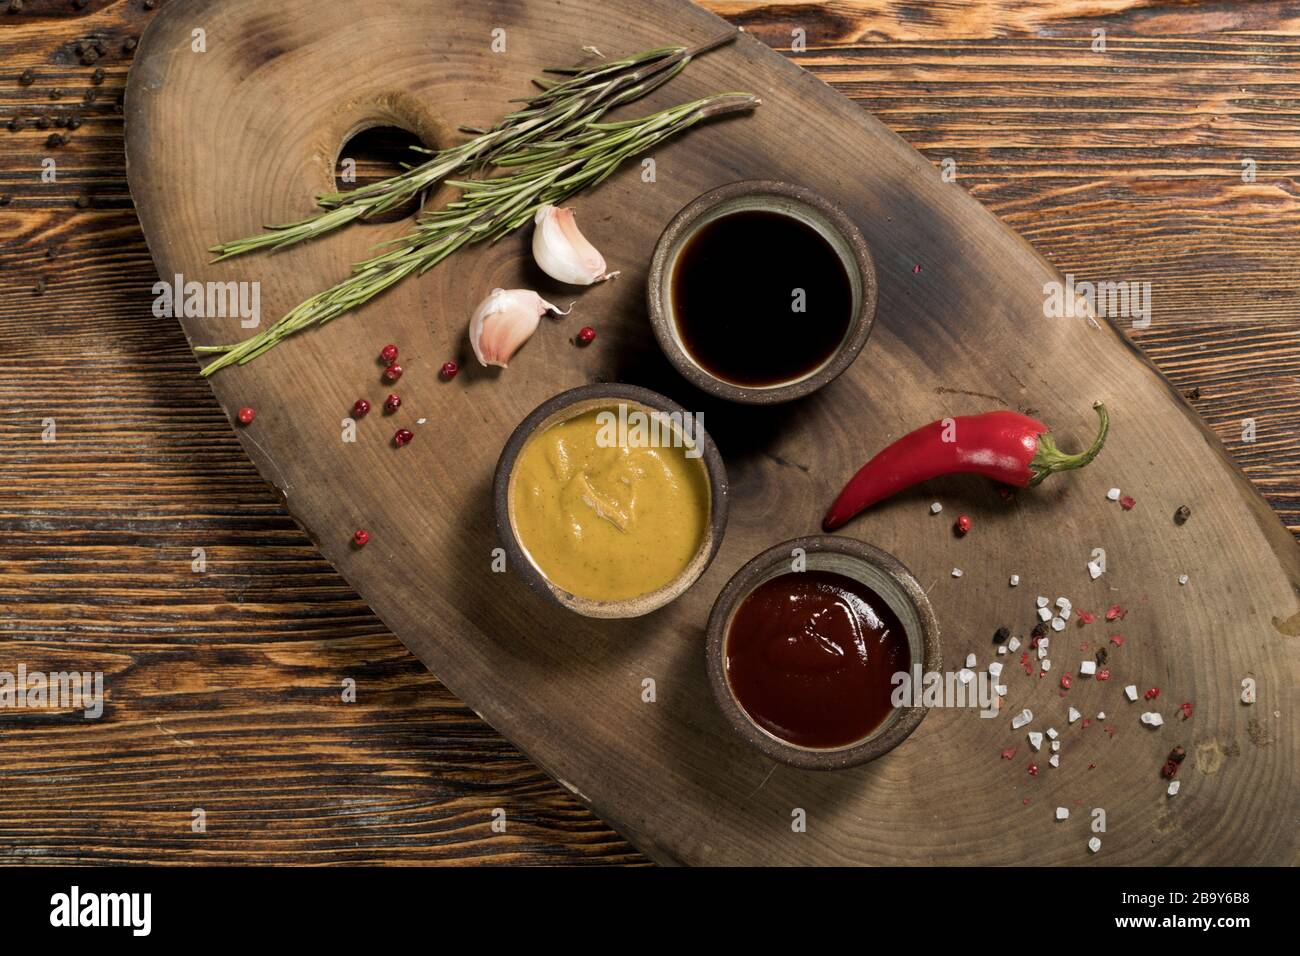 Ingredients, garlic, rosemary, chili pepper, tomato and soy sauce, mustard, spices, red and black pepper, salt on a beautiful dark wooden background, Stock Photo